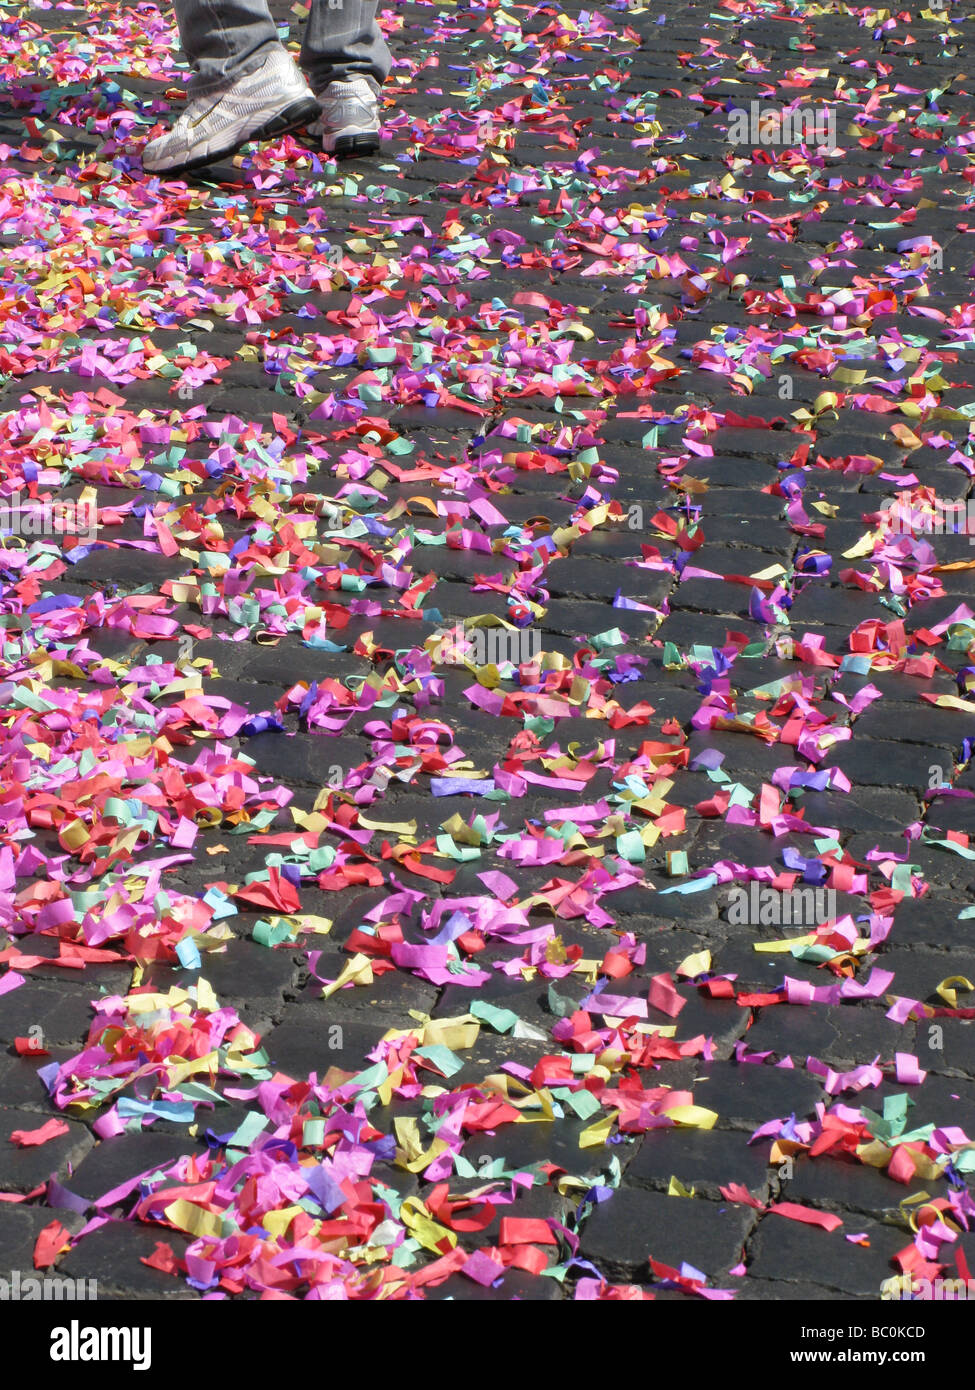 lots of colourful confetti and garlands on paved street road in sun Stock Photo